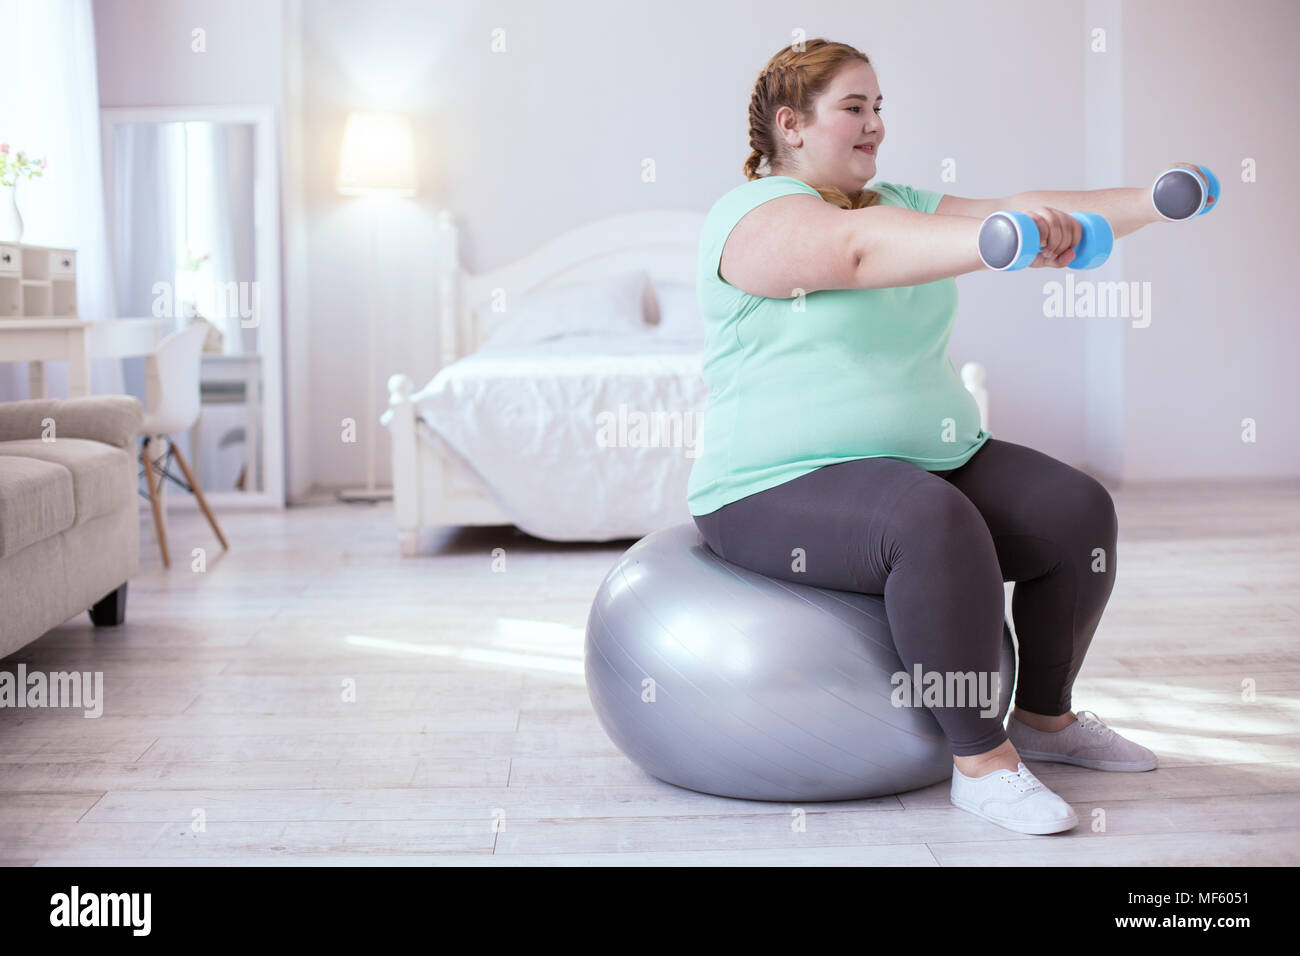 Fat Woman Belly Overweight Close Exercise Stock Photo 1325950292